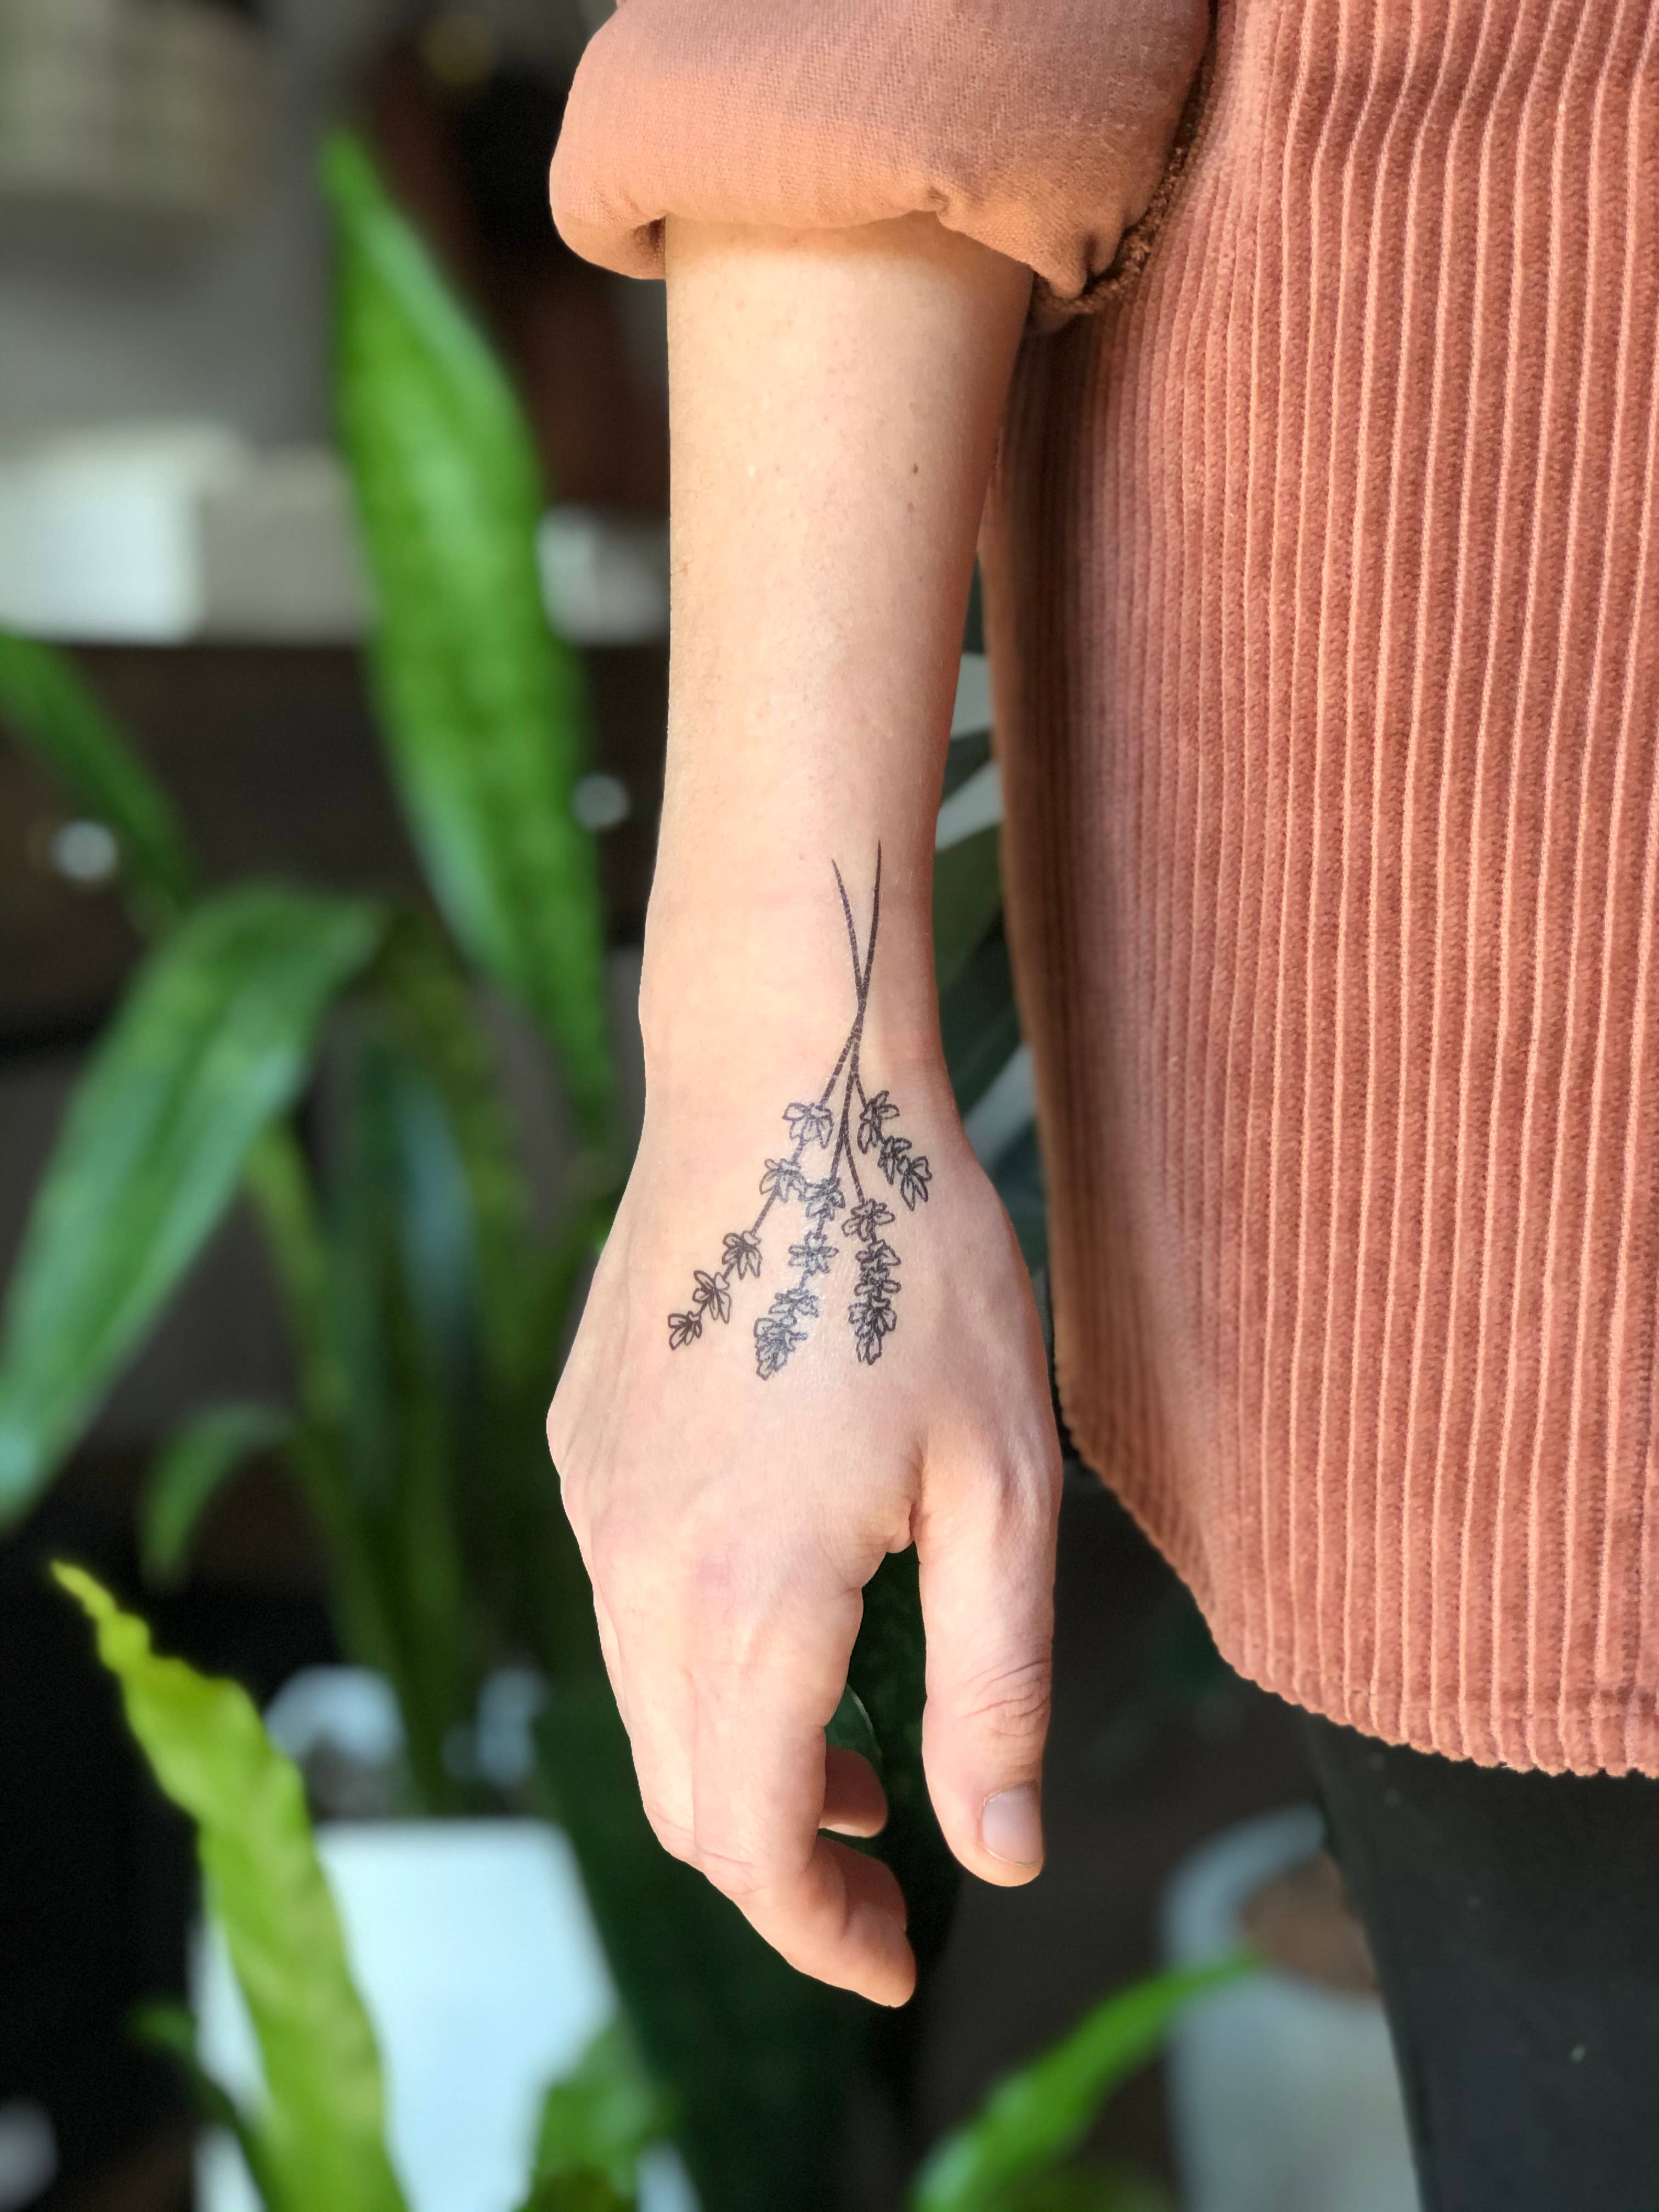 NatureTats - Lavender Twigs Temporary Tattoo - Organ Mountain Outfitters